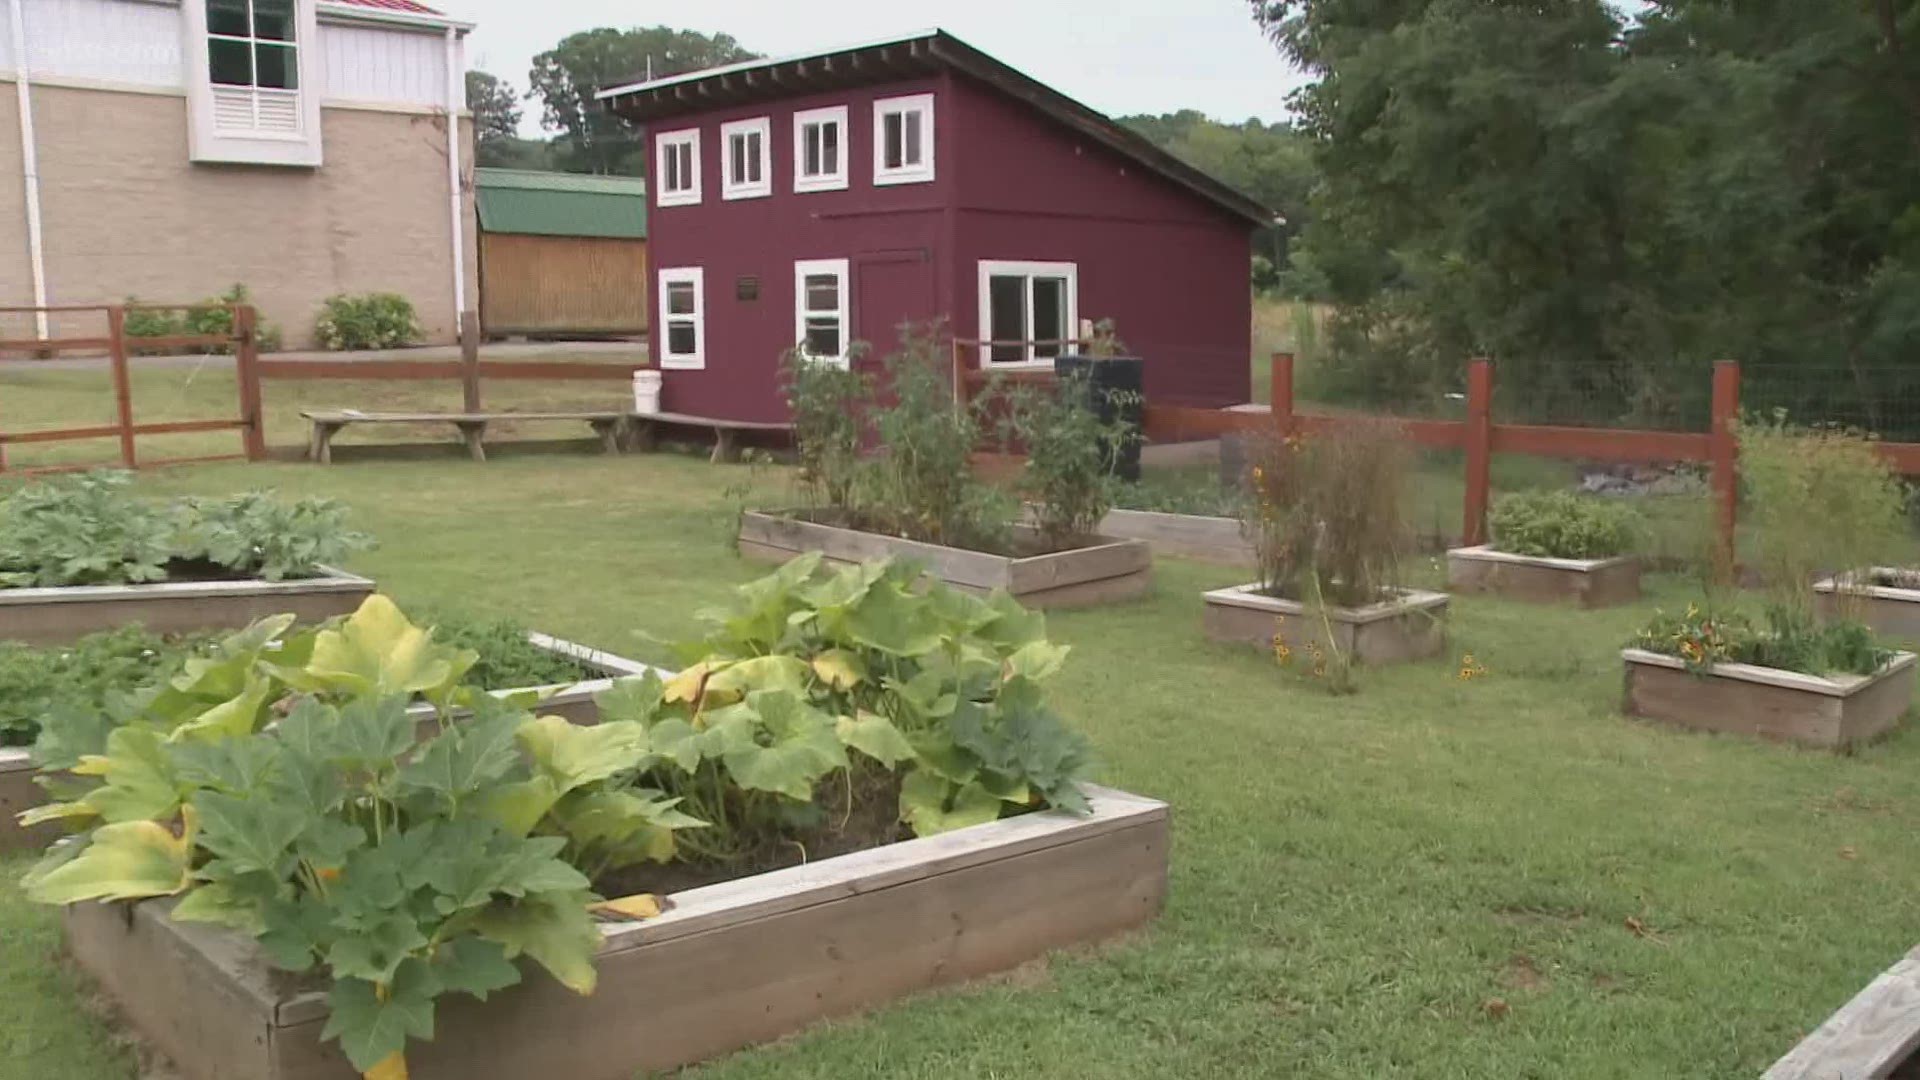 The school garden is ready for students to explore when classes resume August 17